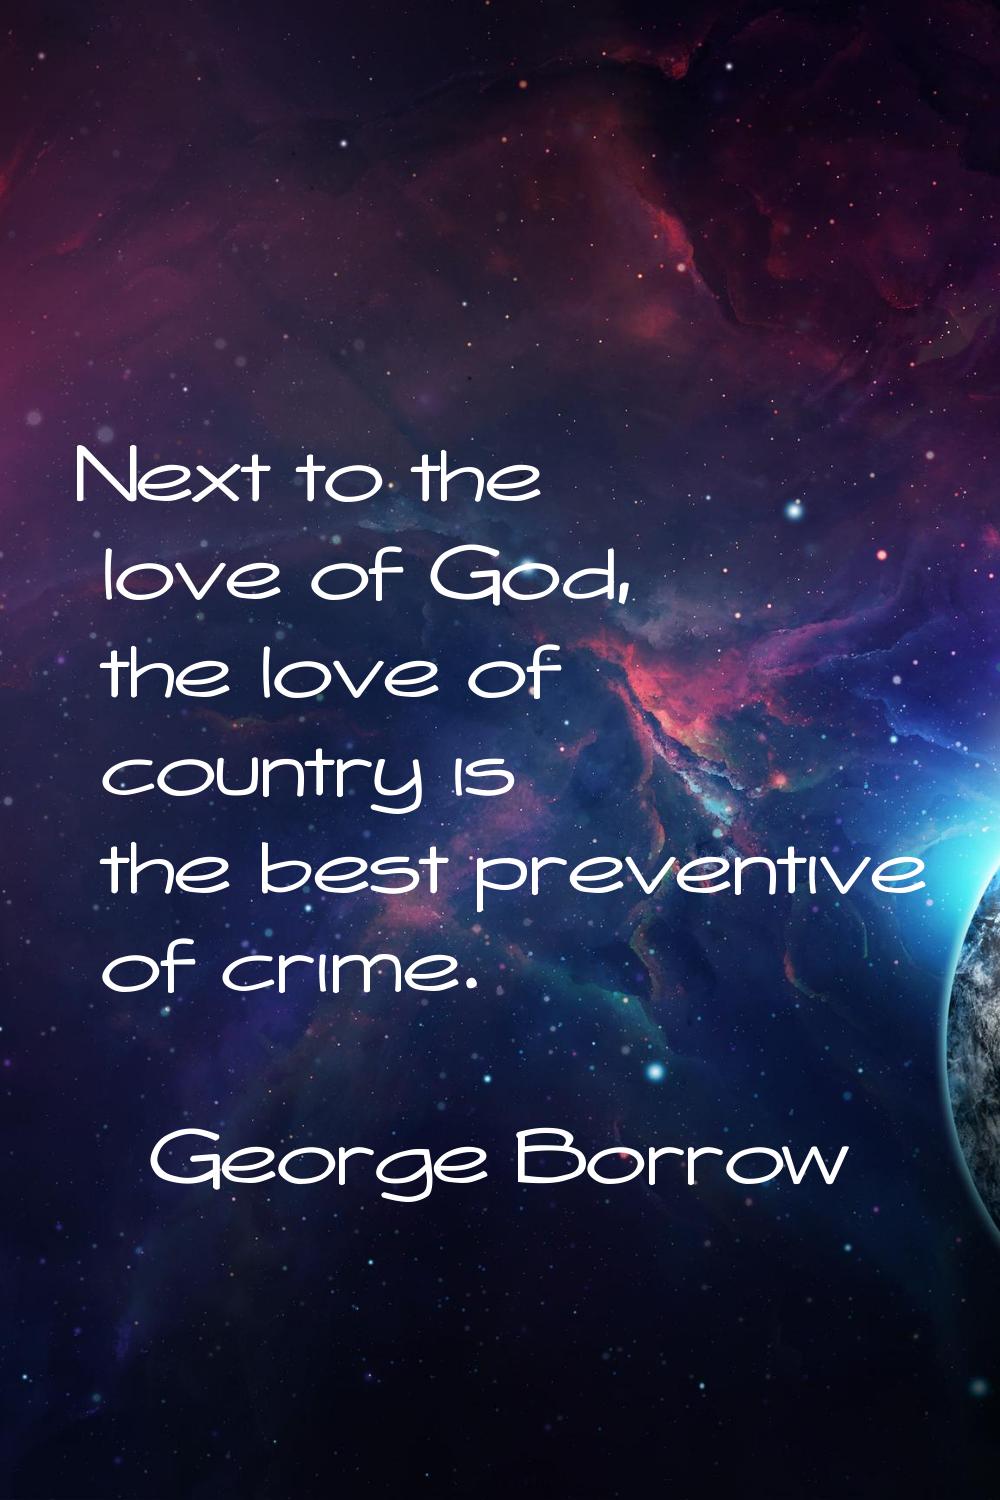 Next to the love of God, the love of country is the best preventive of crime.